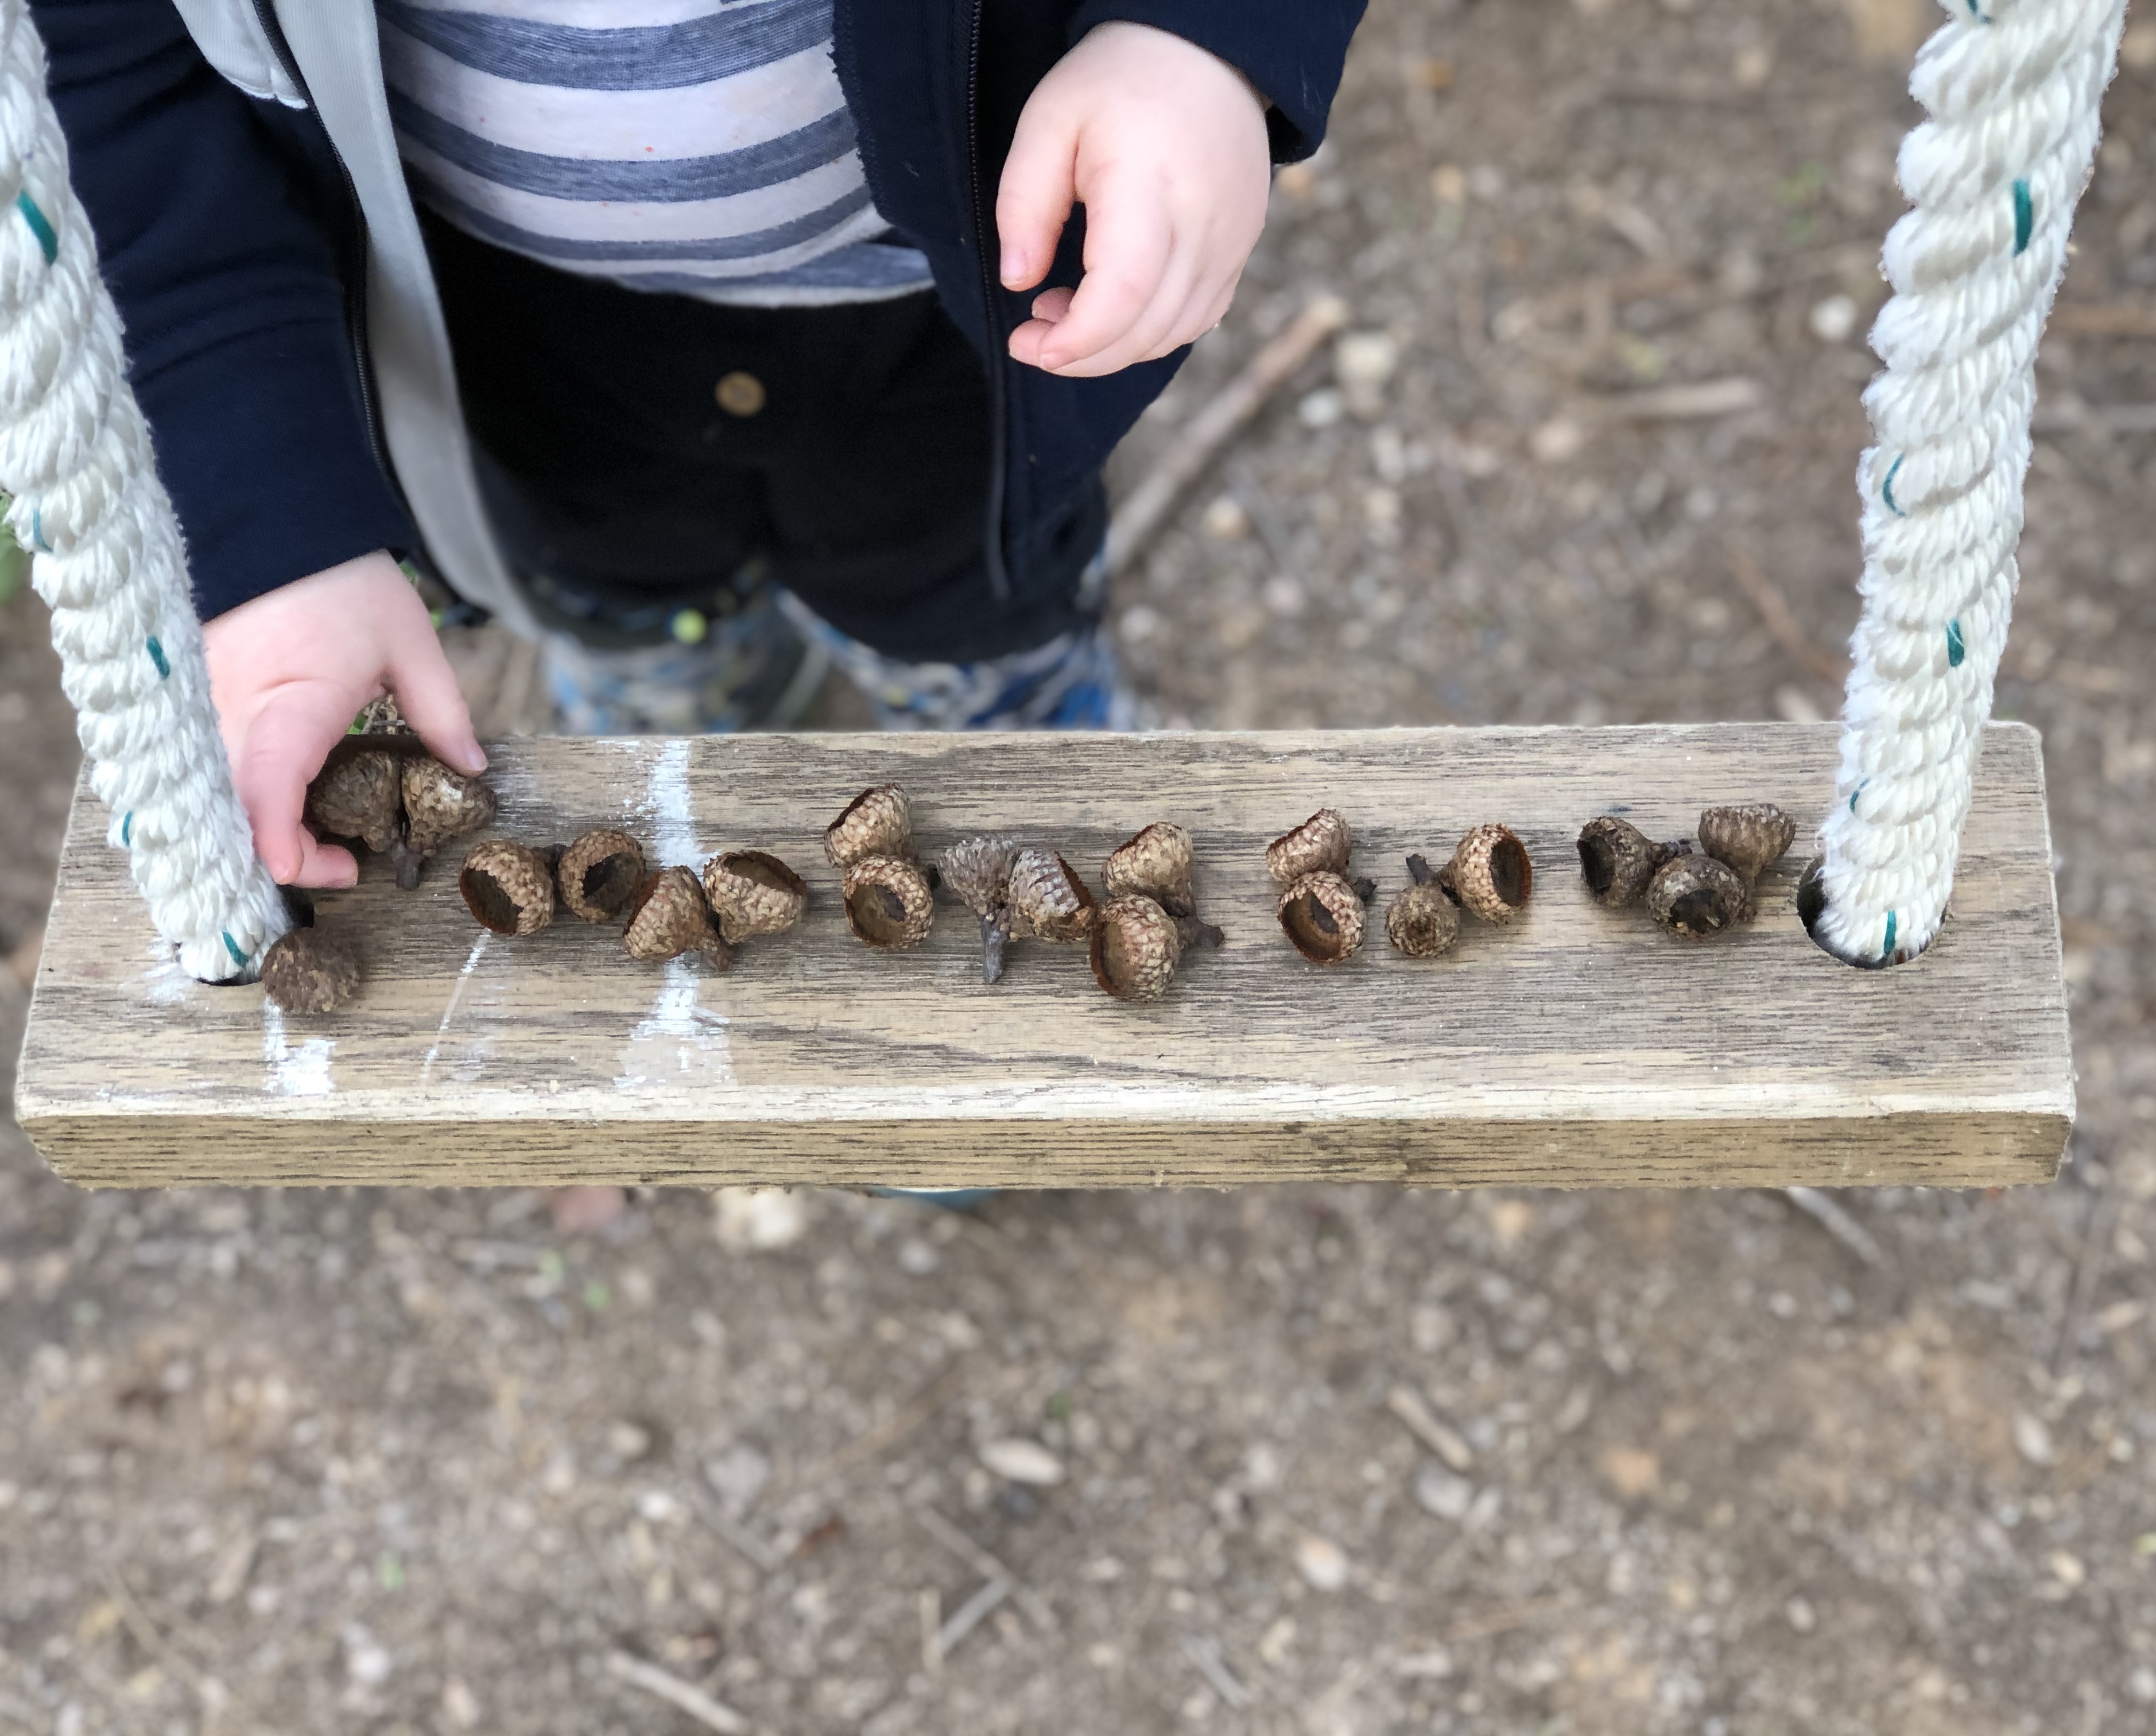 A parade of acorns comprised of acorns in a row